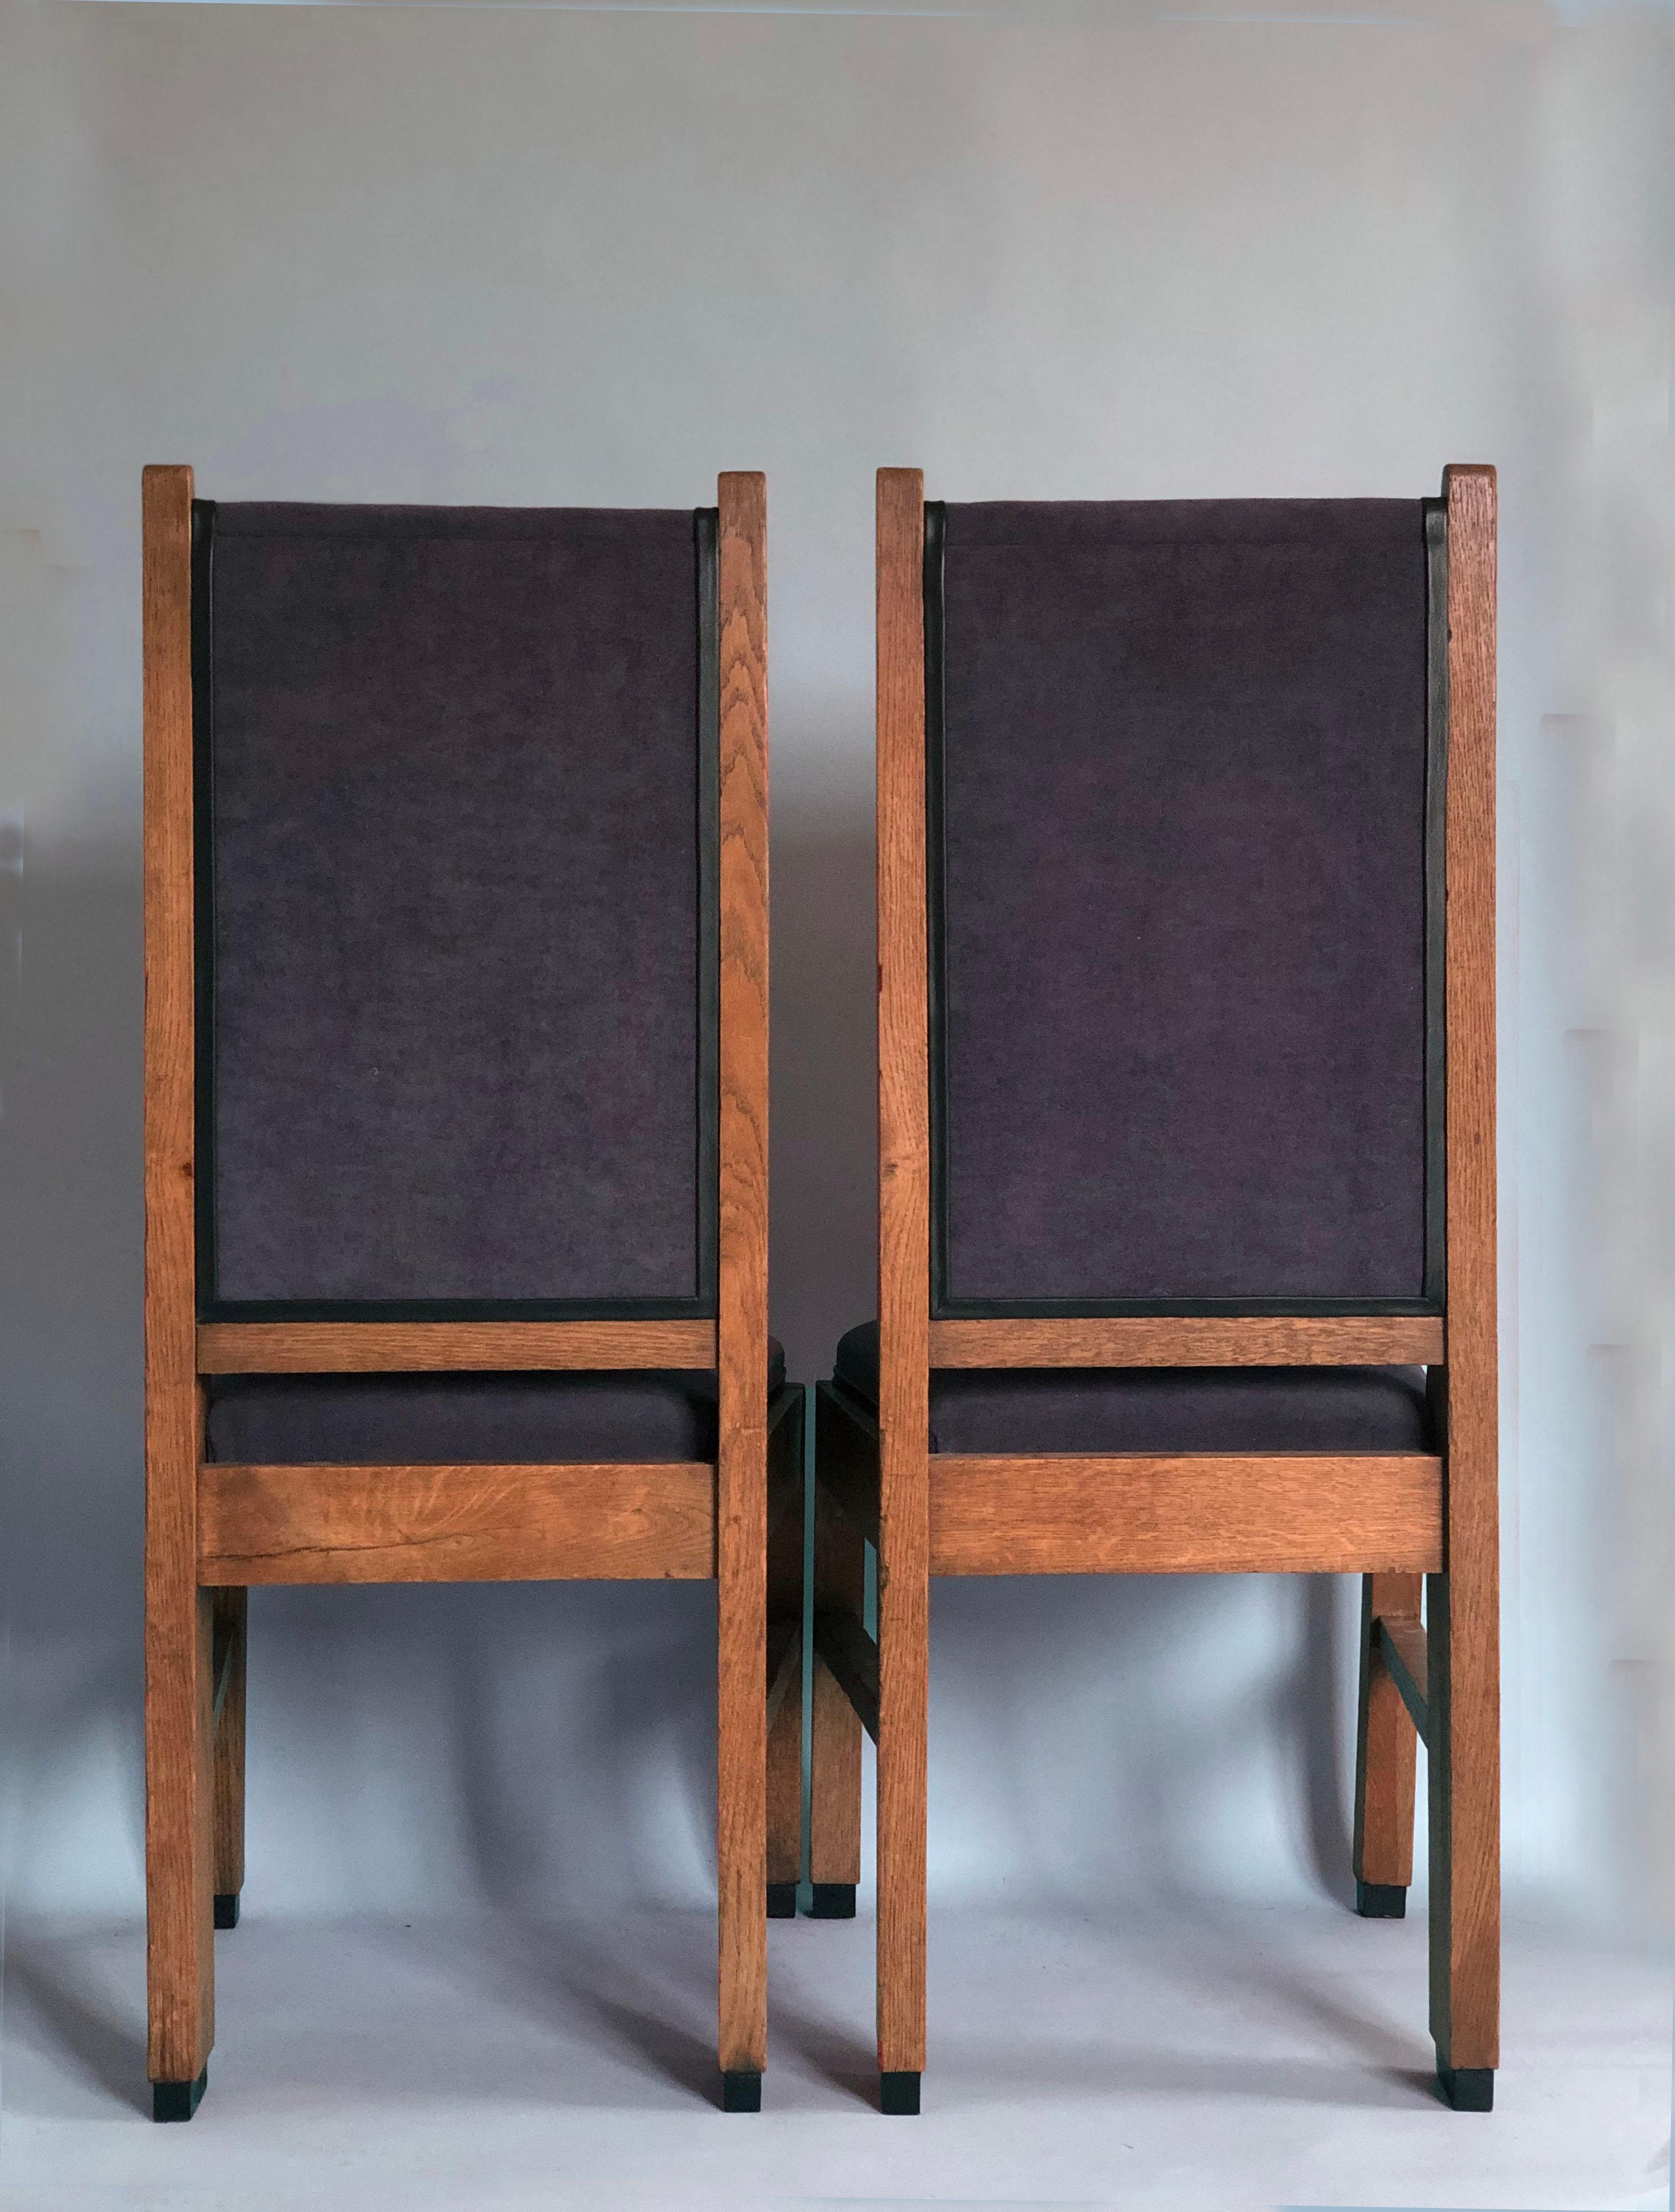 Mid-20th Century Art Deco Haagse School Dining Chair Frits Spanjaard 1930s Set of 2 For Sale